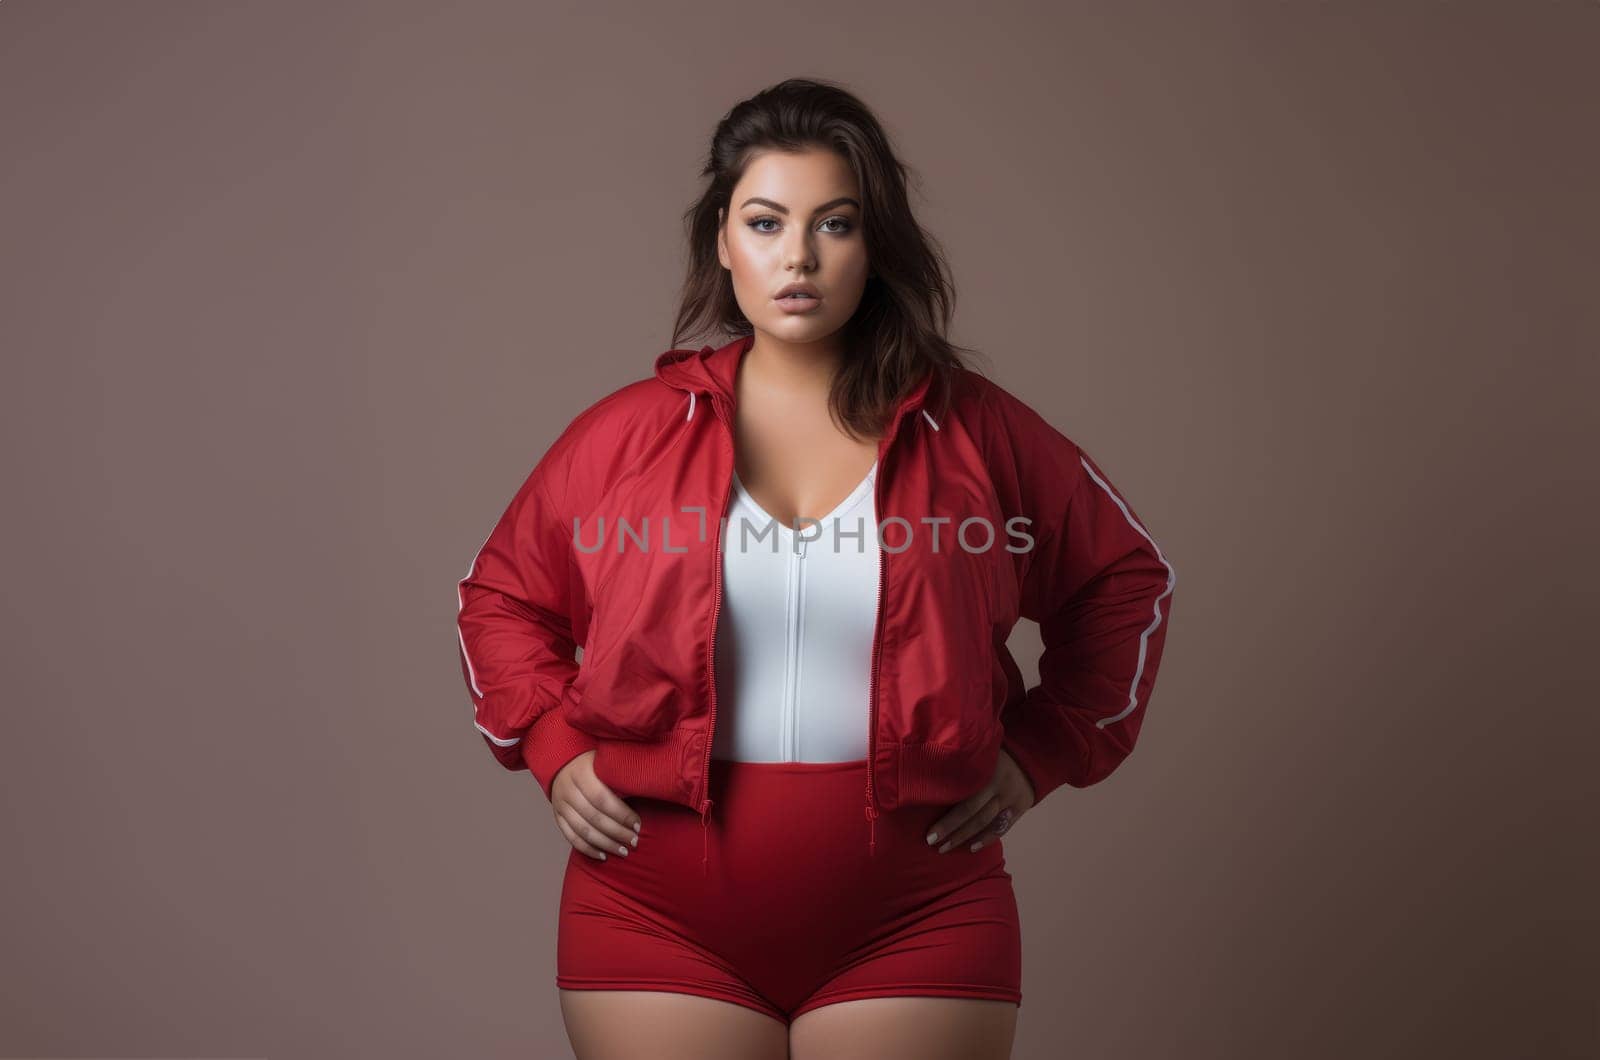 A plus-size woman in red sportswear poses confidently against a red backdrop, radiating strength and determination.Generated image by dotshock